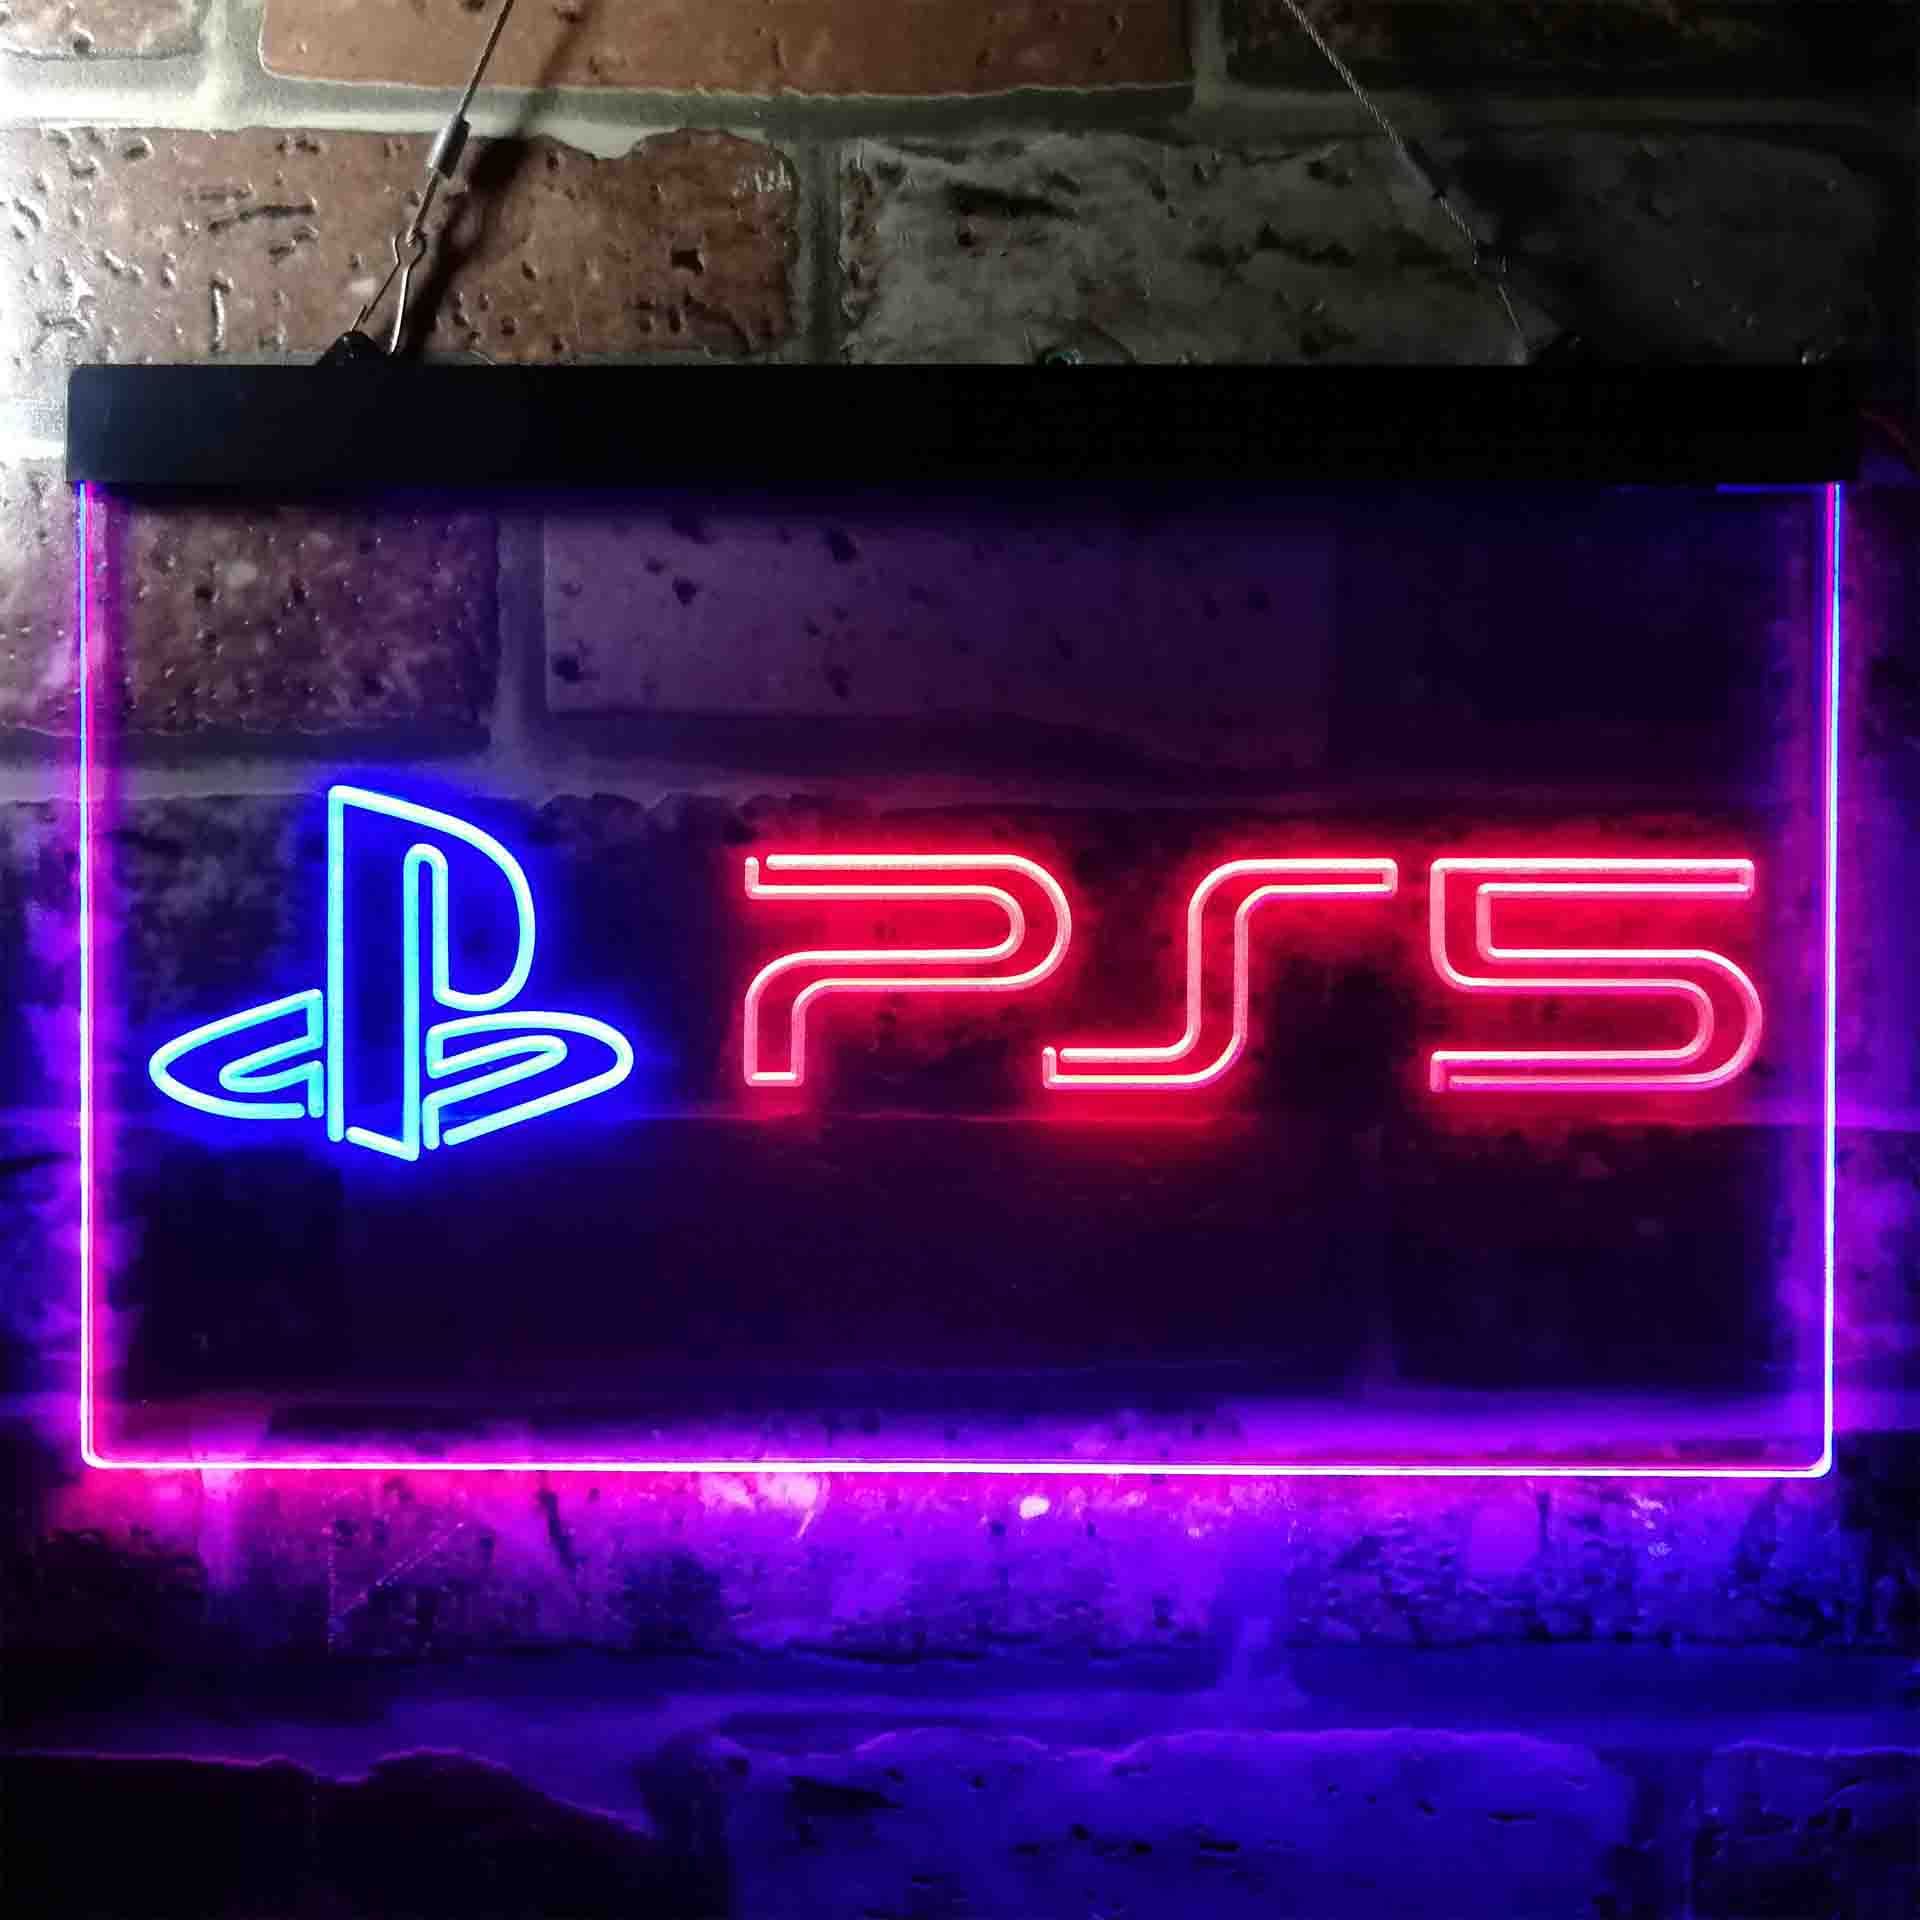 PS5 Playstation 5 Game Room Neon Like LED Sign & Red / 24 In W X 16 In H (60cm X 40cm). Led Neon Signs, Game Room Accessories, Game Room